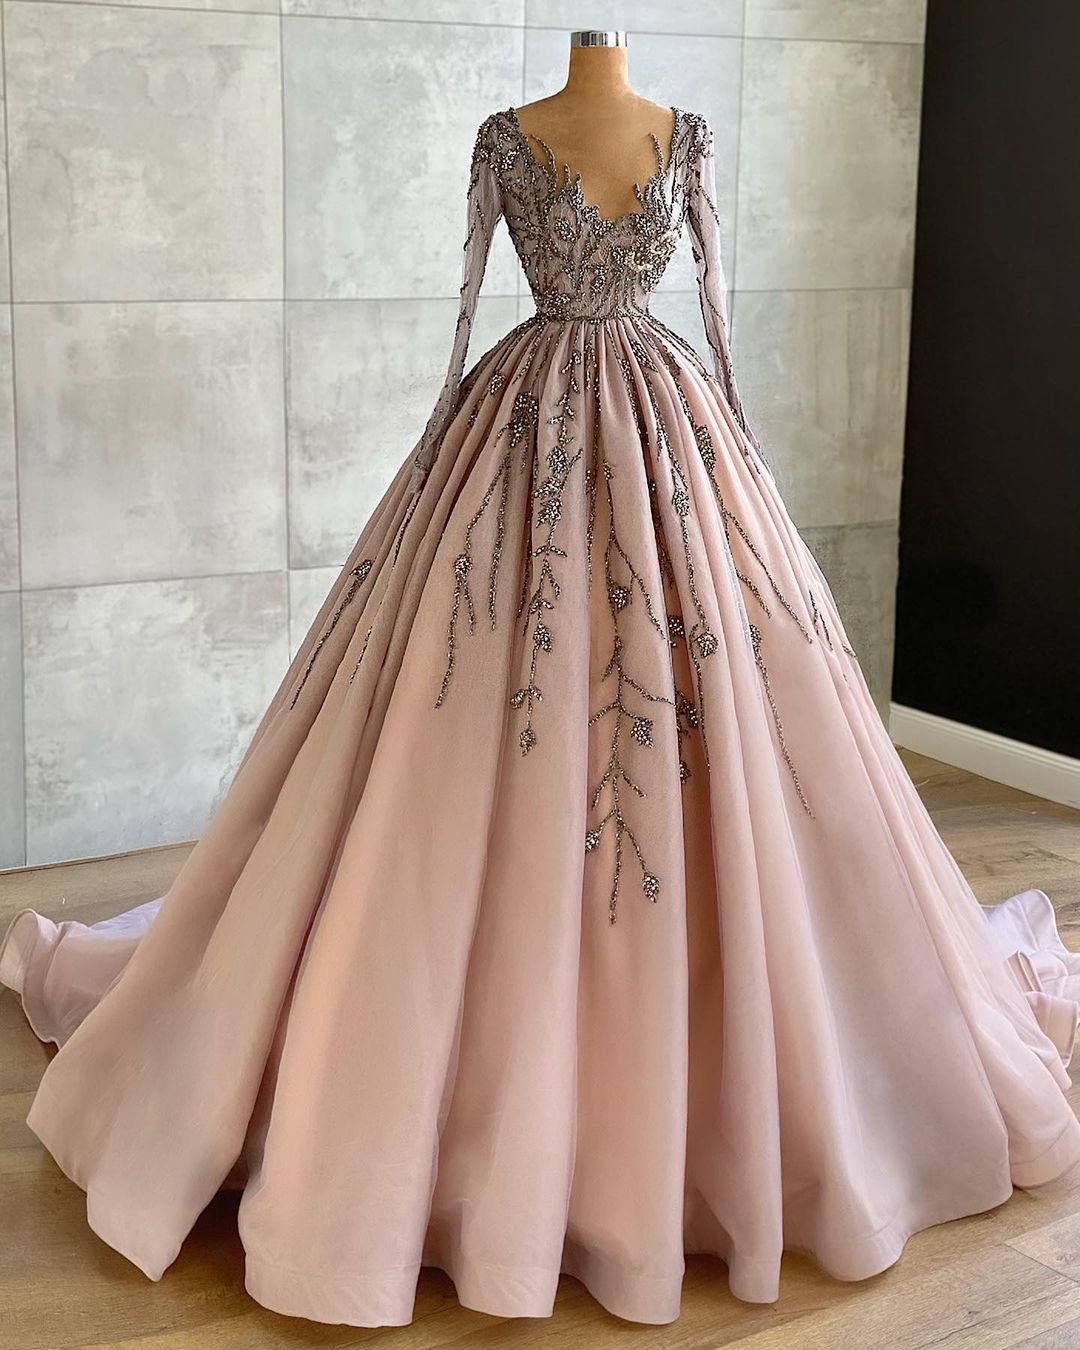 Glamorous Beadings Long Sleeve Prom Dress Ball Gown Evening Gowns